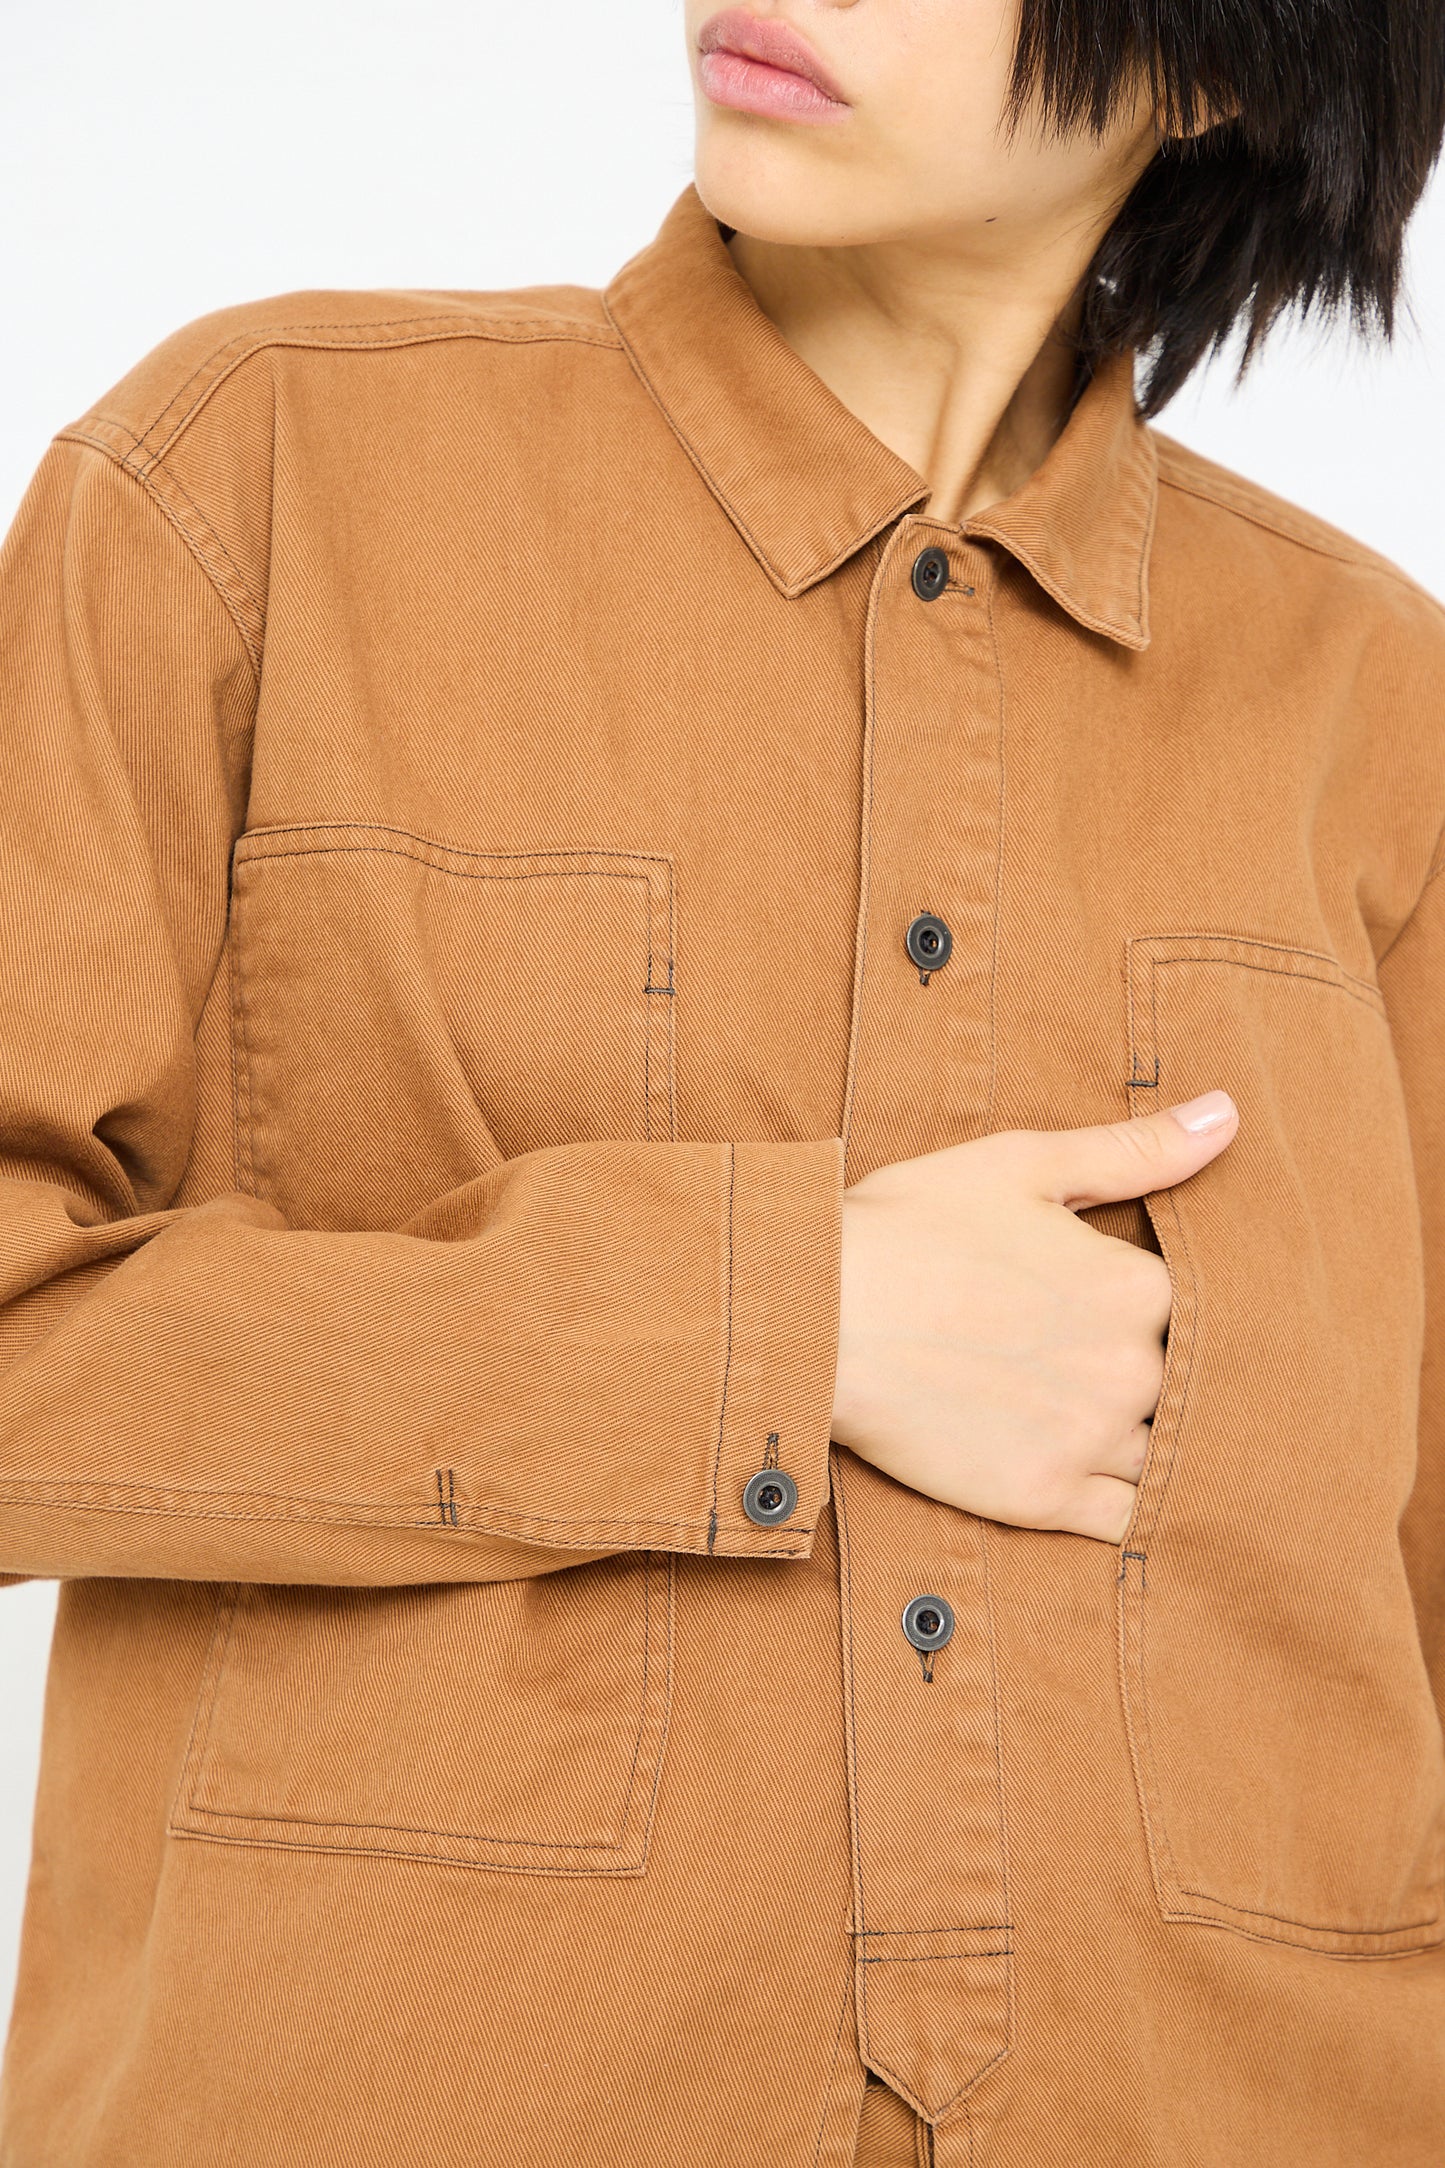 A person wearing a Chimala Unisex Classic Drill US Army Work Jacket in Camel with their hand on their hip.